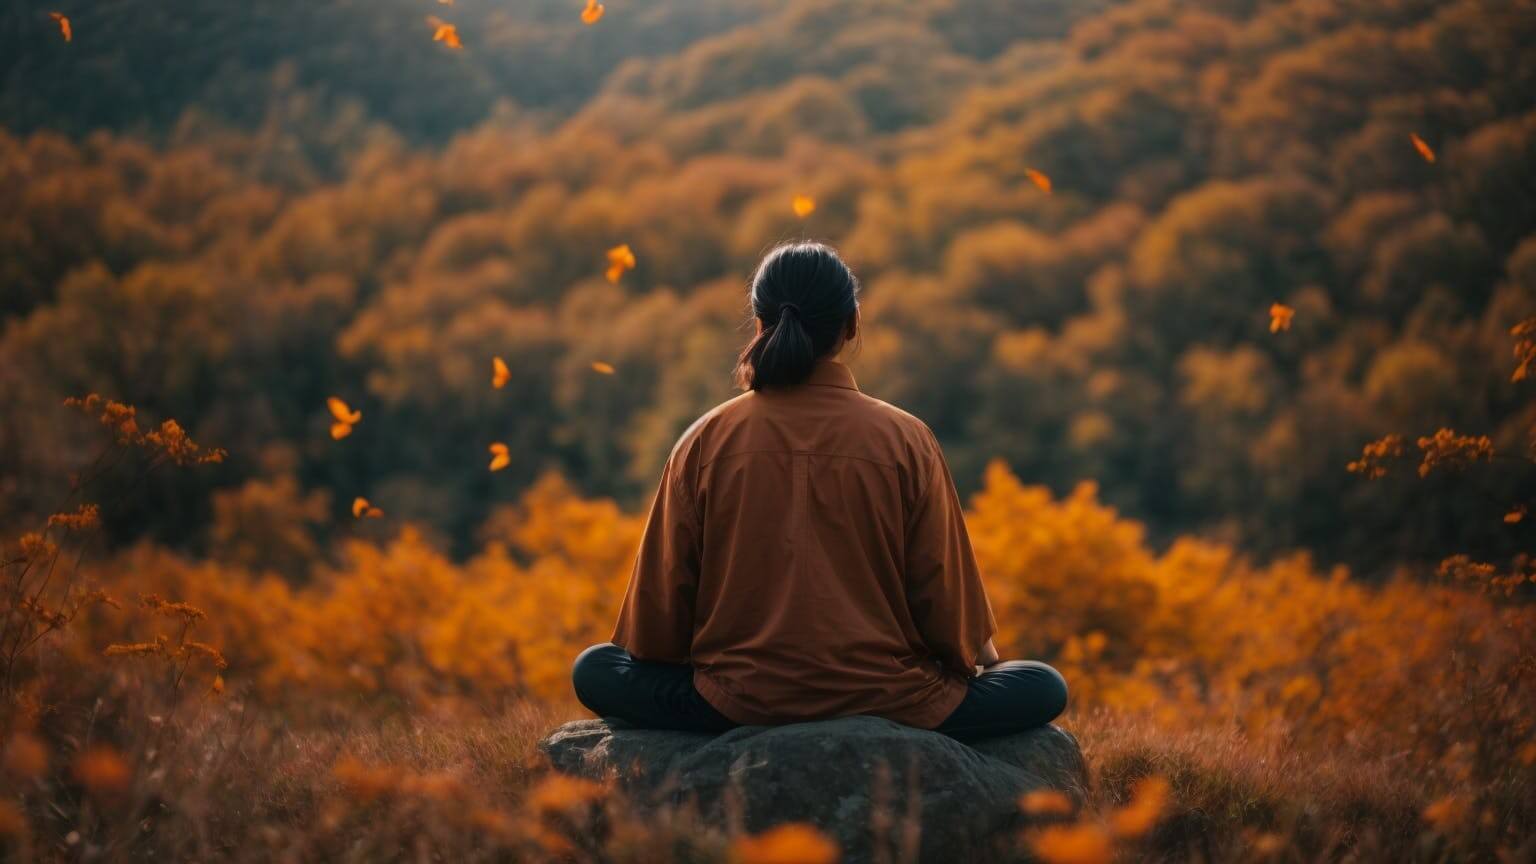 incorporating mindfulness meditation into daily routines